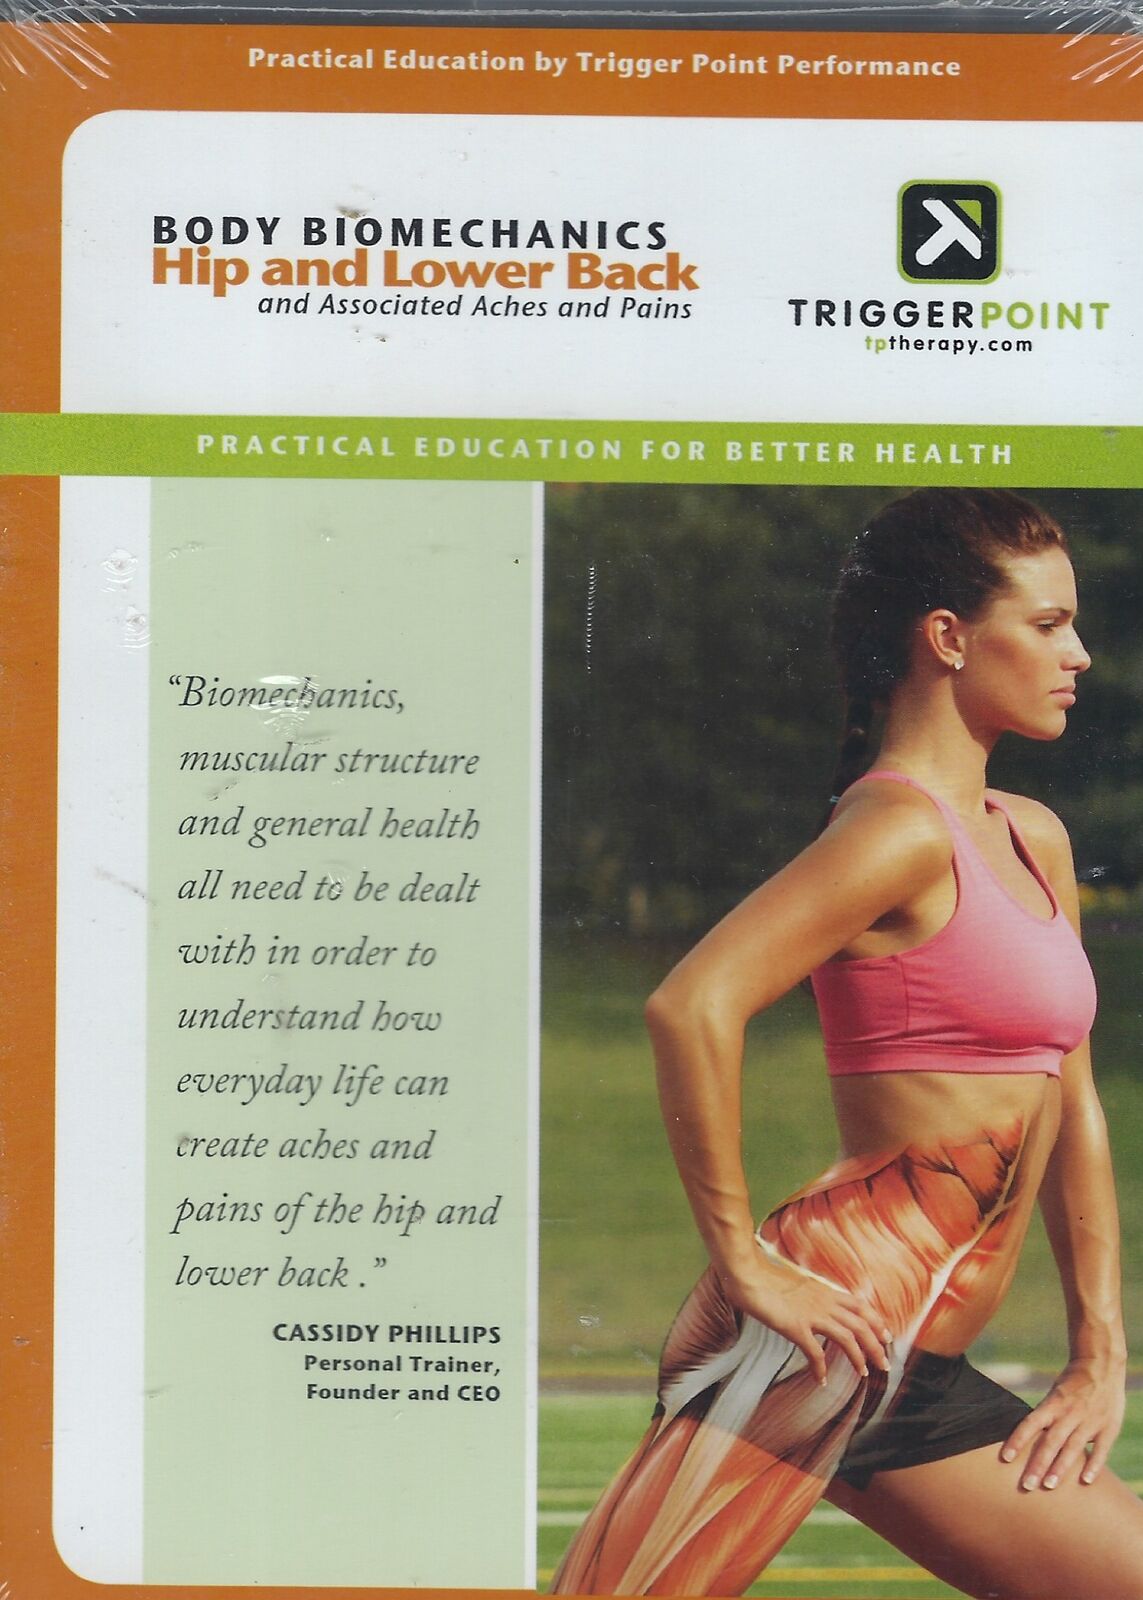 Body Biomechanics Hip and Lower Back (Triggerpoint) DVD